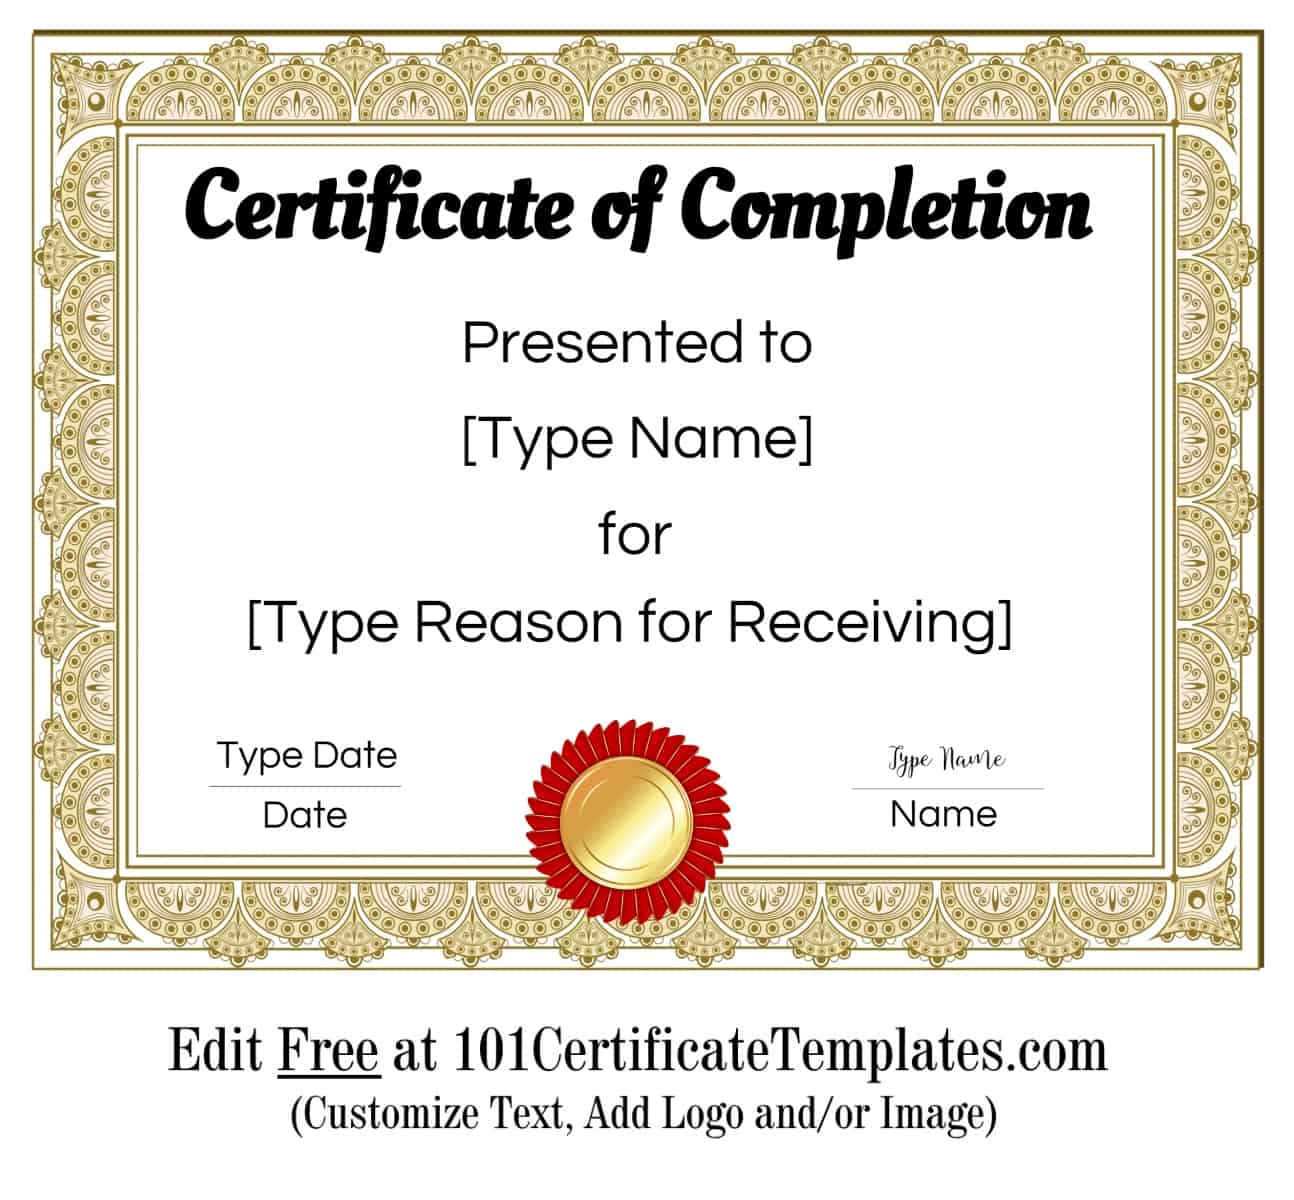 free-certificate-of-completion-customize-online-then-print